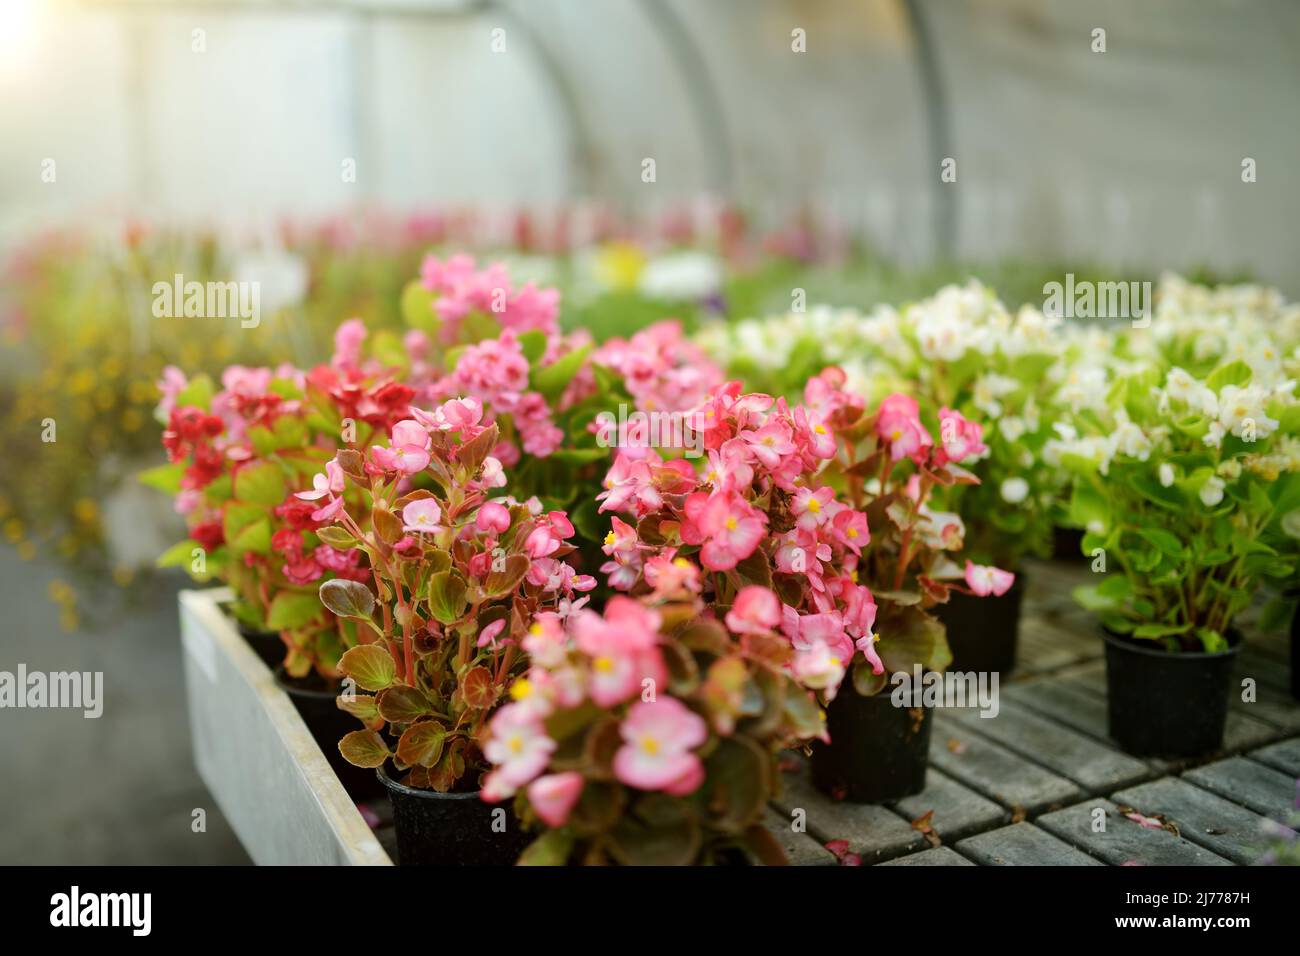 Colorful begonia plant in pots. Flowers for sale in greenhouse. Red and pink begonia with green leafs. Stock Photo